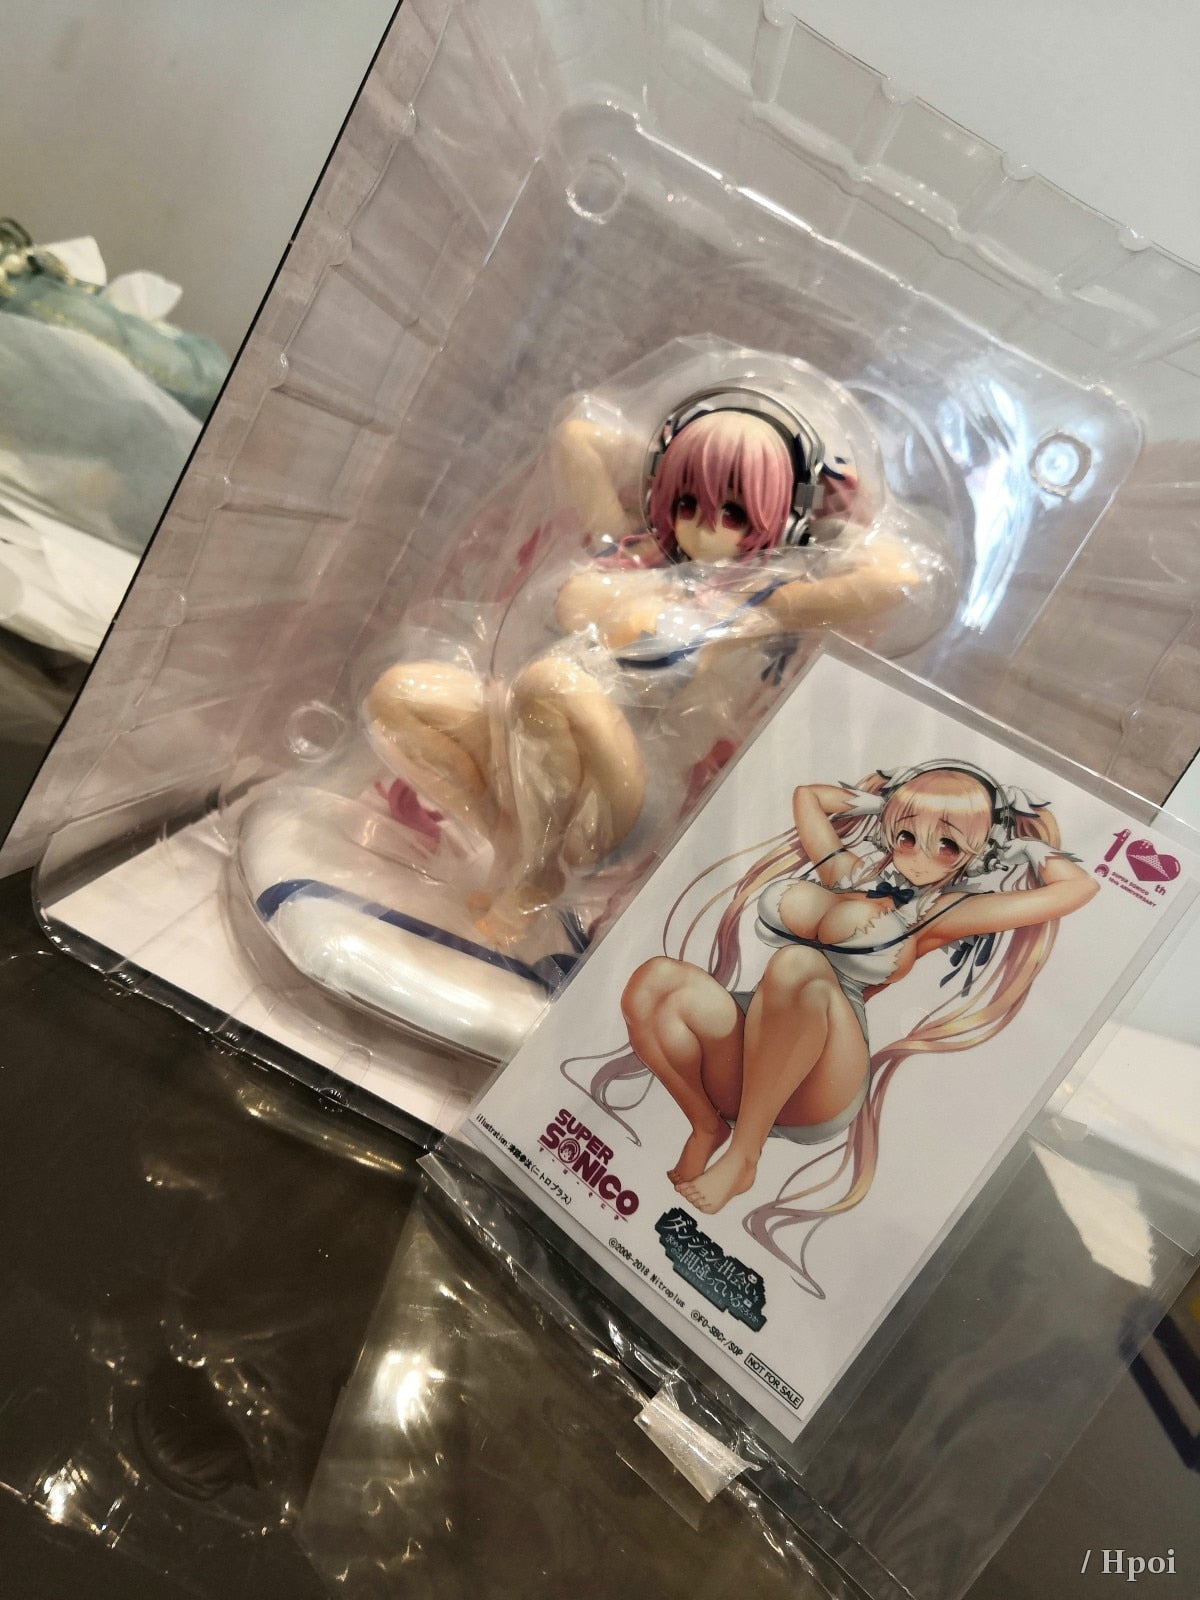 23CM Anime Sexy Cute Figure Anime SUPERSONICO Cospaly Hestia Dungeon Squat Pose Model Dolls Toy Gift BoxCollect PVC Material